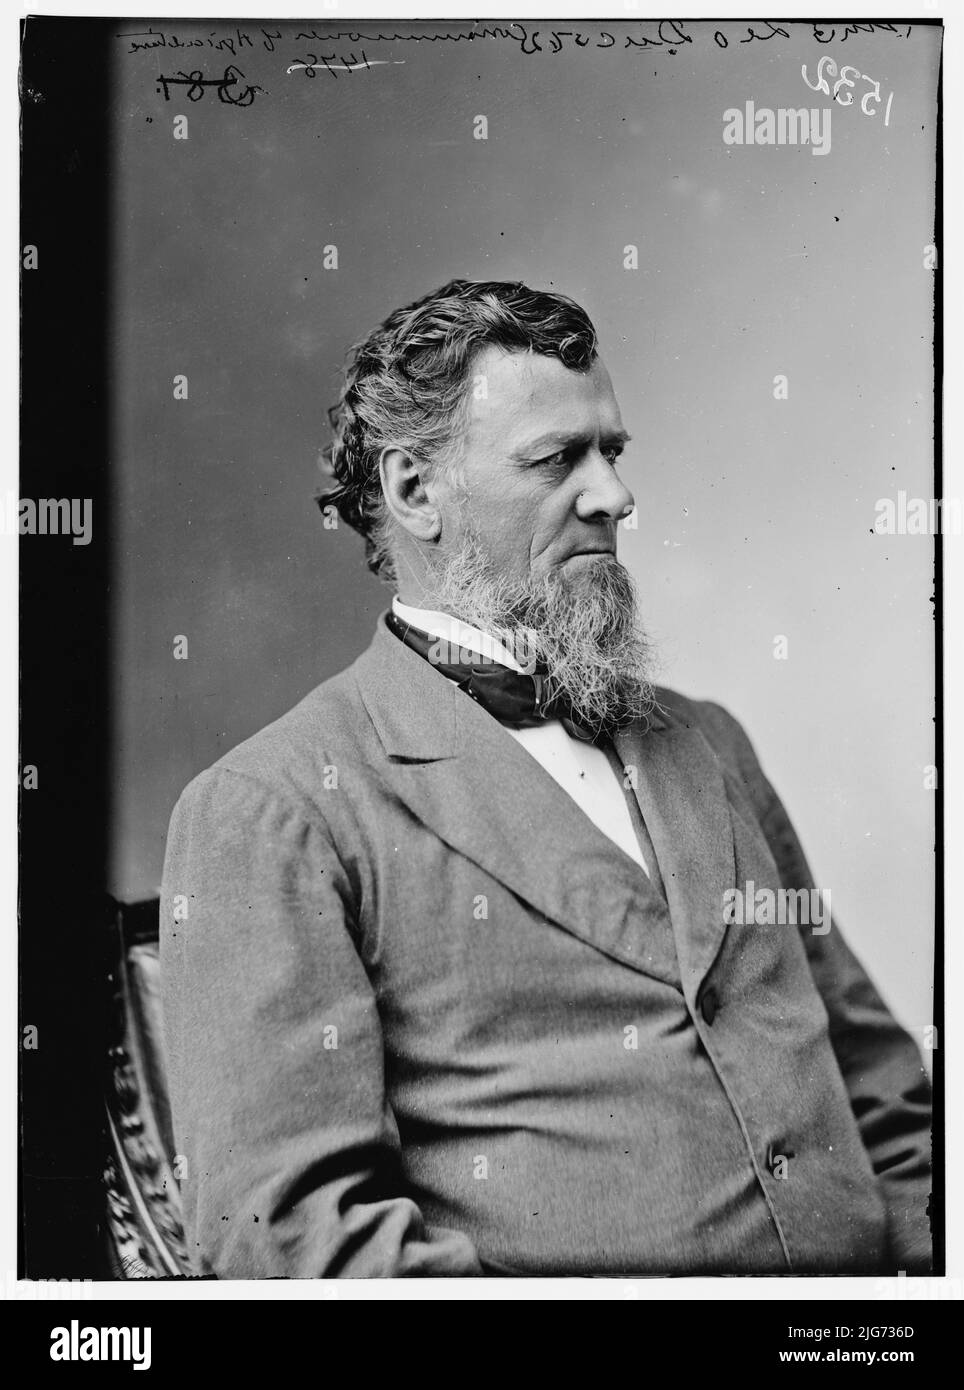 La Duc, General, Commissioner of Agriculture, between 1870 and 1880. [Possibly a portrait of William Gates LeDuc, politician, officer in the Union Army during the American Civil War]. Stock Photo